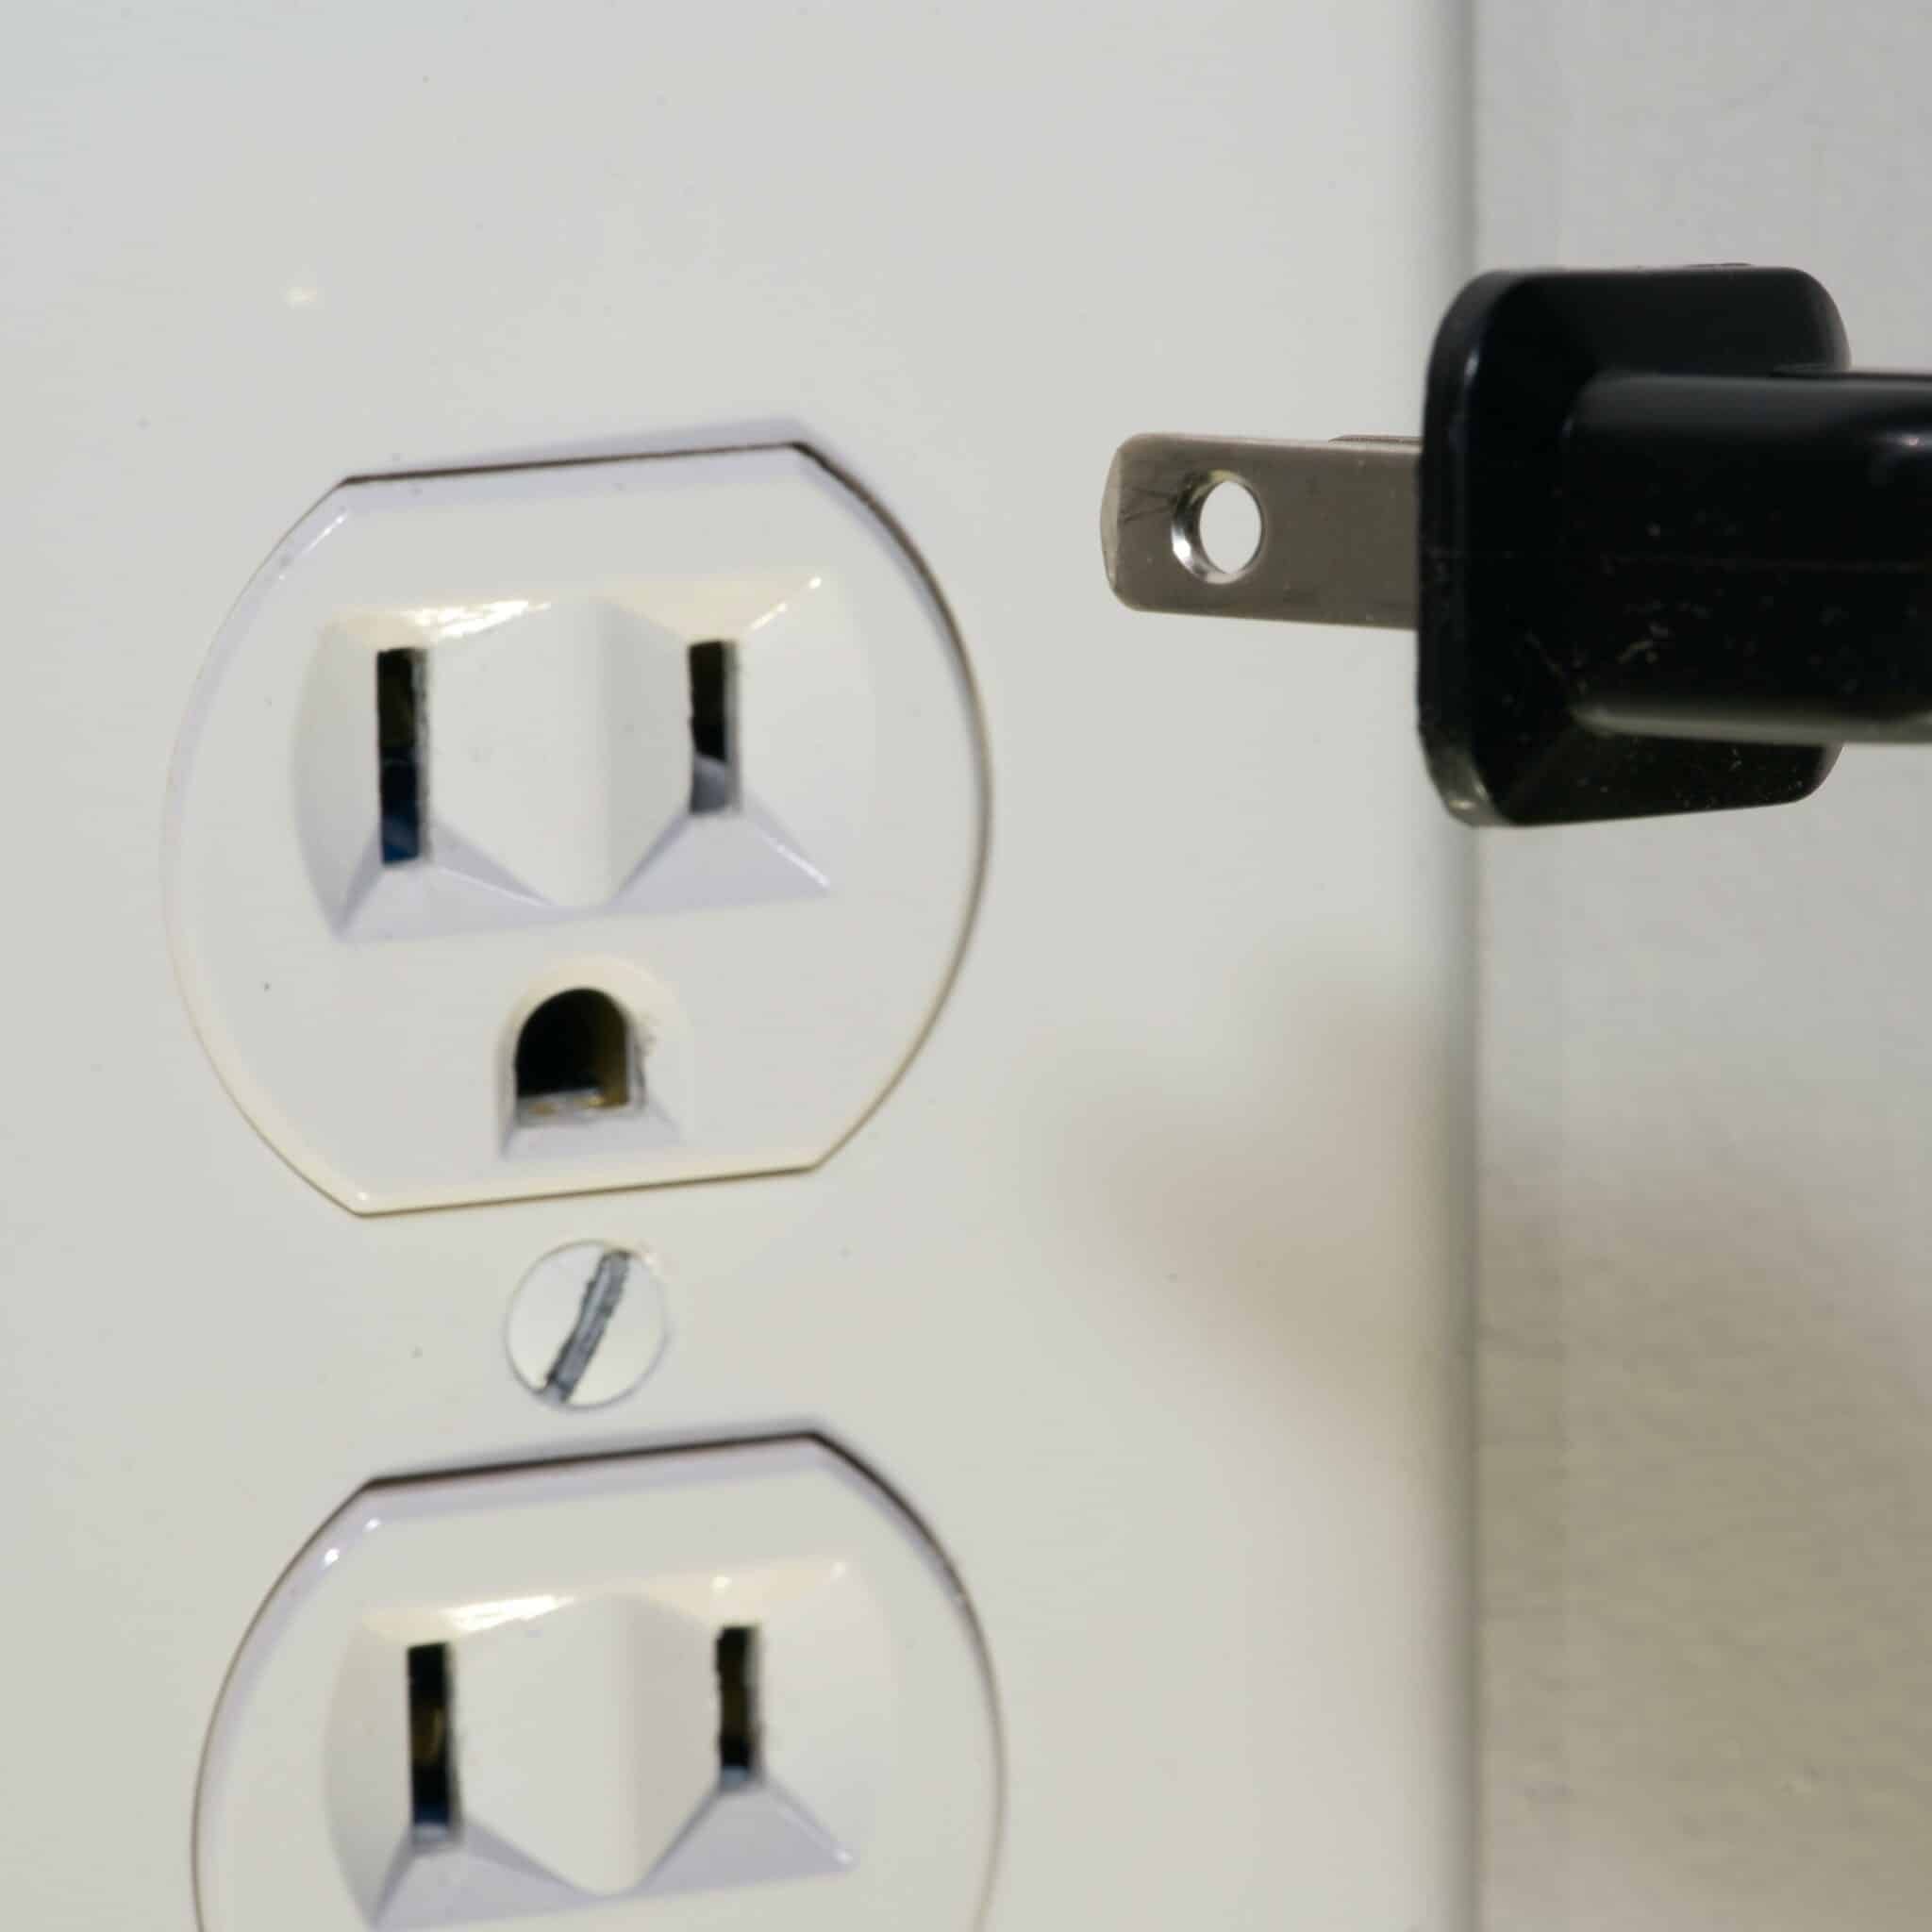 White electrical outlet with electrical plug approaching